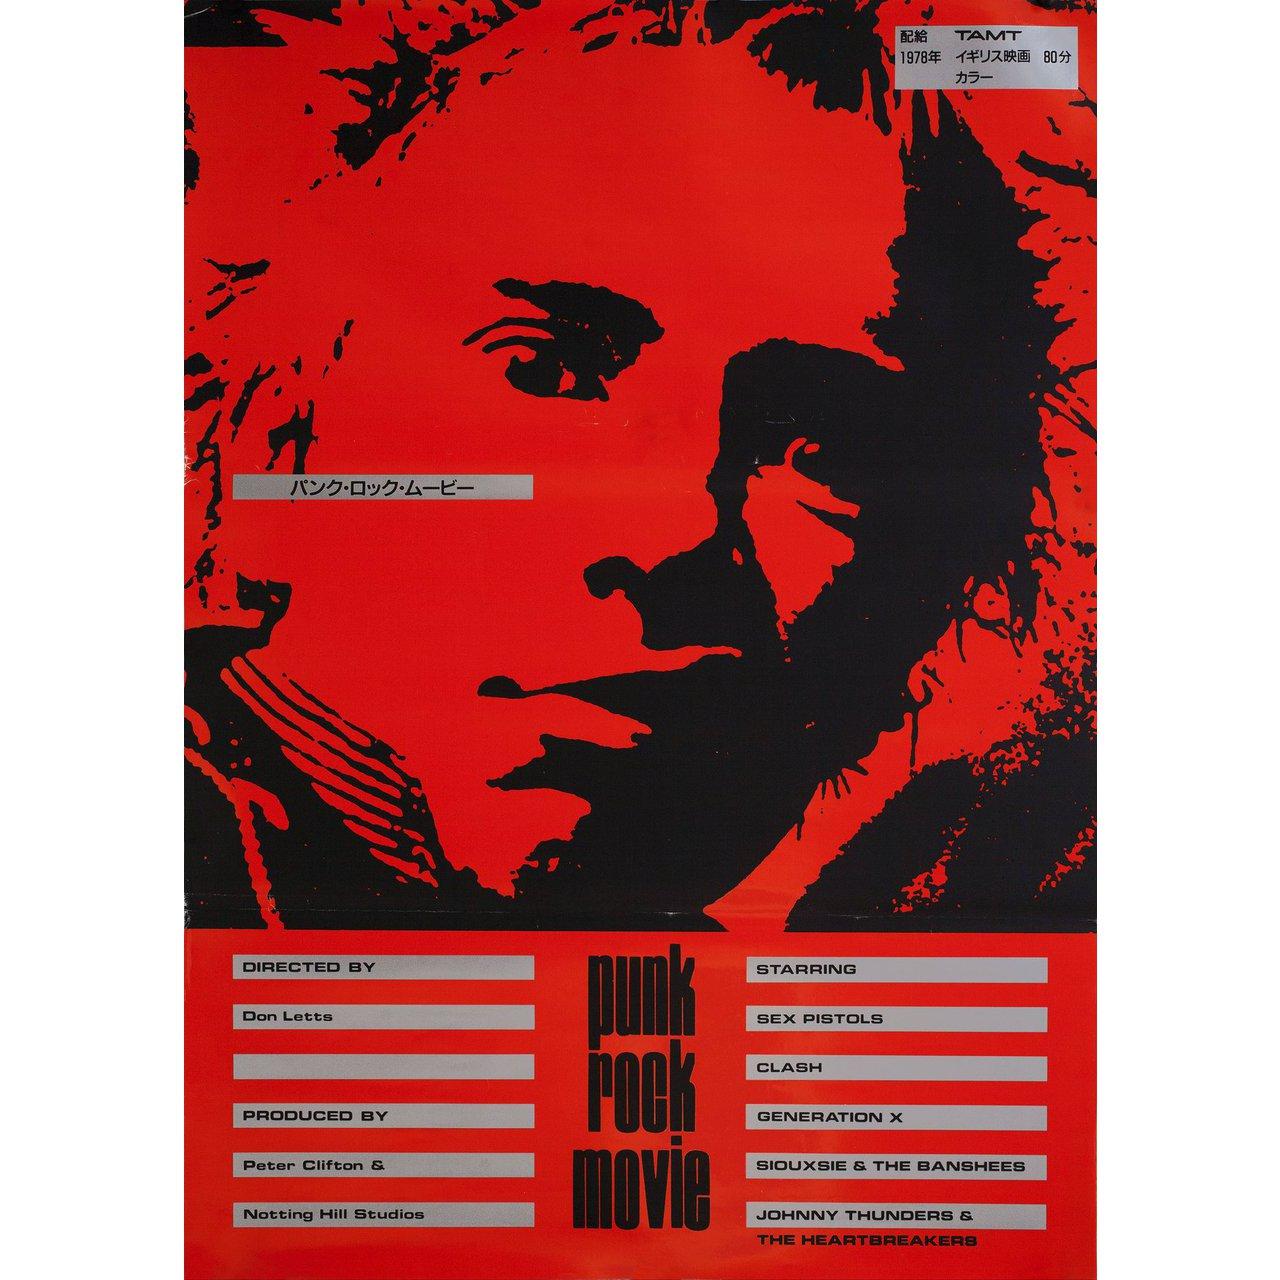 Original 1999 re-release Japanese B2 poster for the 1978 documentary film The Punk Rock Movie from England (The Punk Rock Movie) directed by Don Letts with John Lydon / Sid Vicious / Joe Strummer / Siouxsie Sioux / Sex Pistols / The Clash / Soo